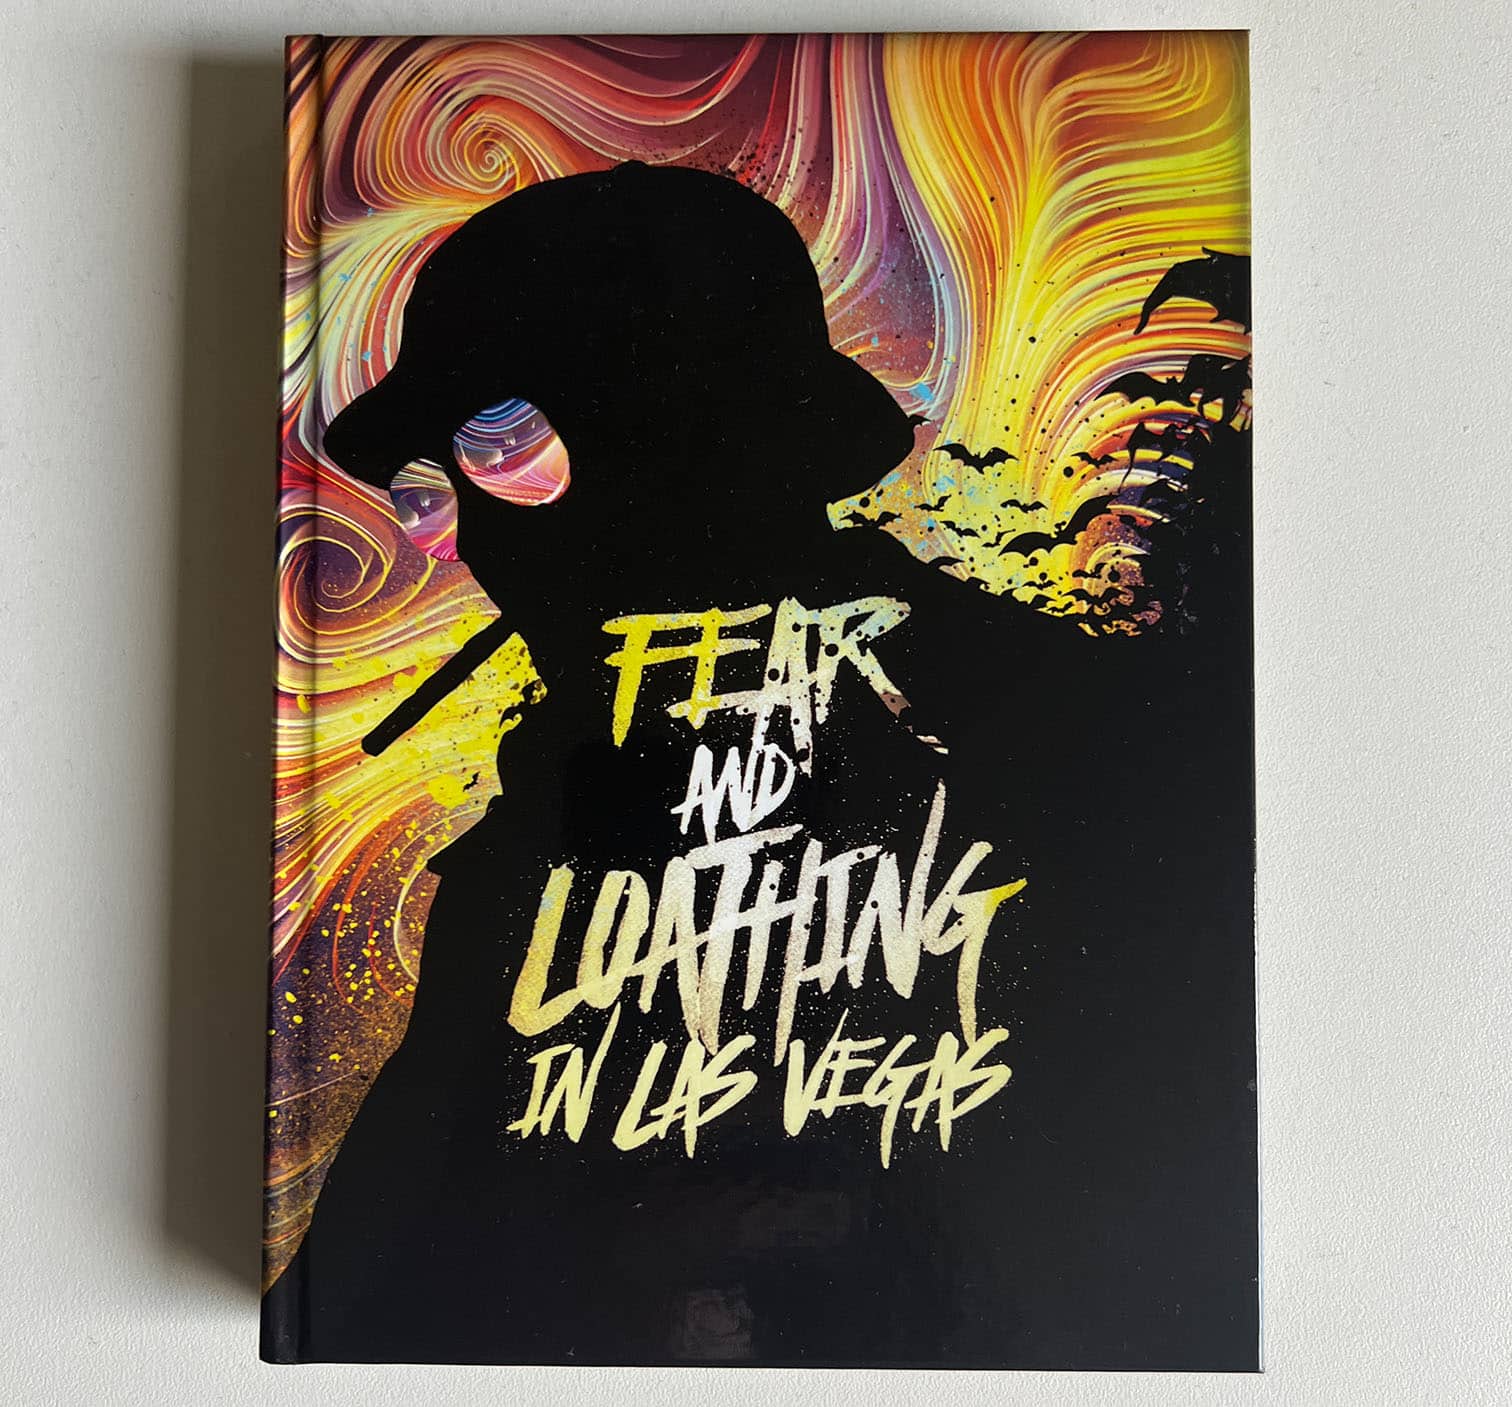 [Review] Fear and Loathing in Las Vegas Blu-ray & DVD (Limited Mediabook Edition) Cover C